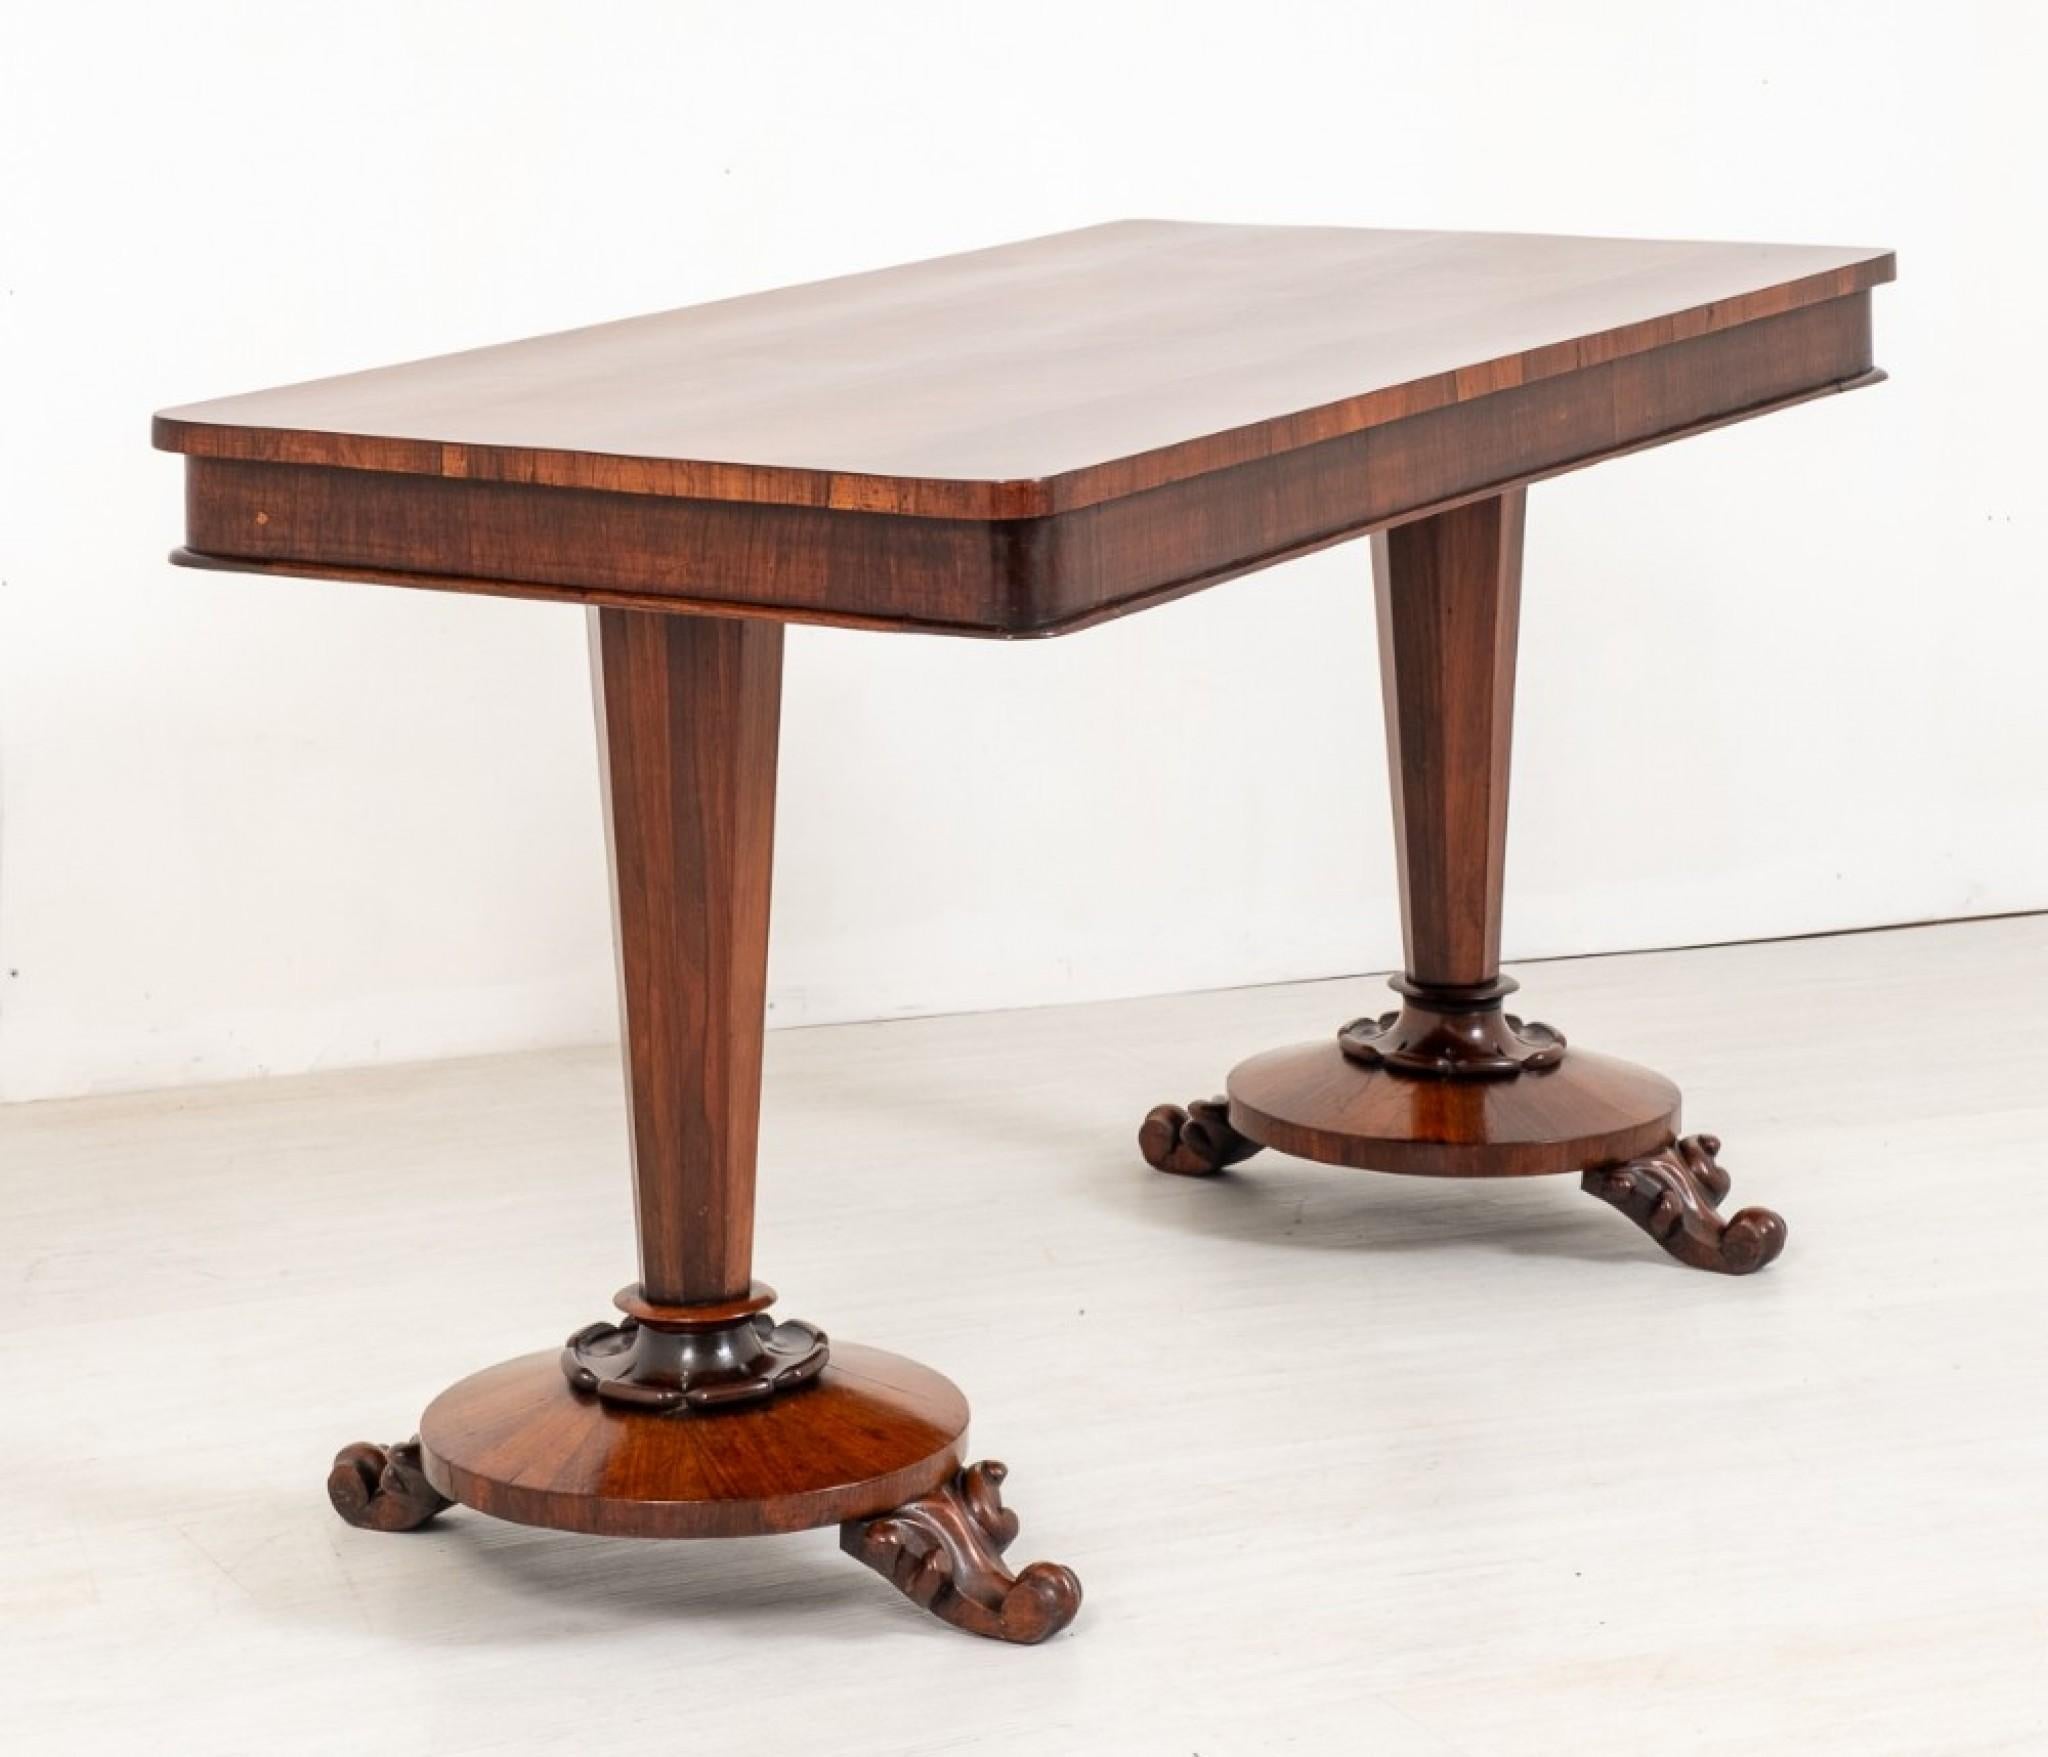 William IV rosewood stretcher table.
19th century
Featuring 